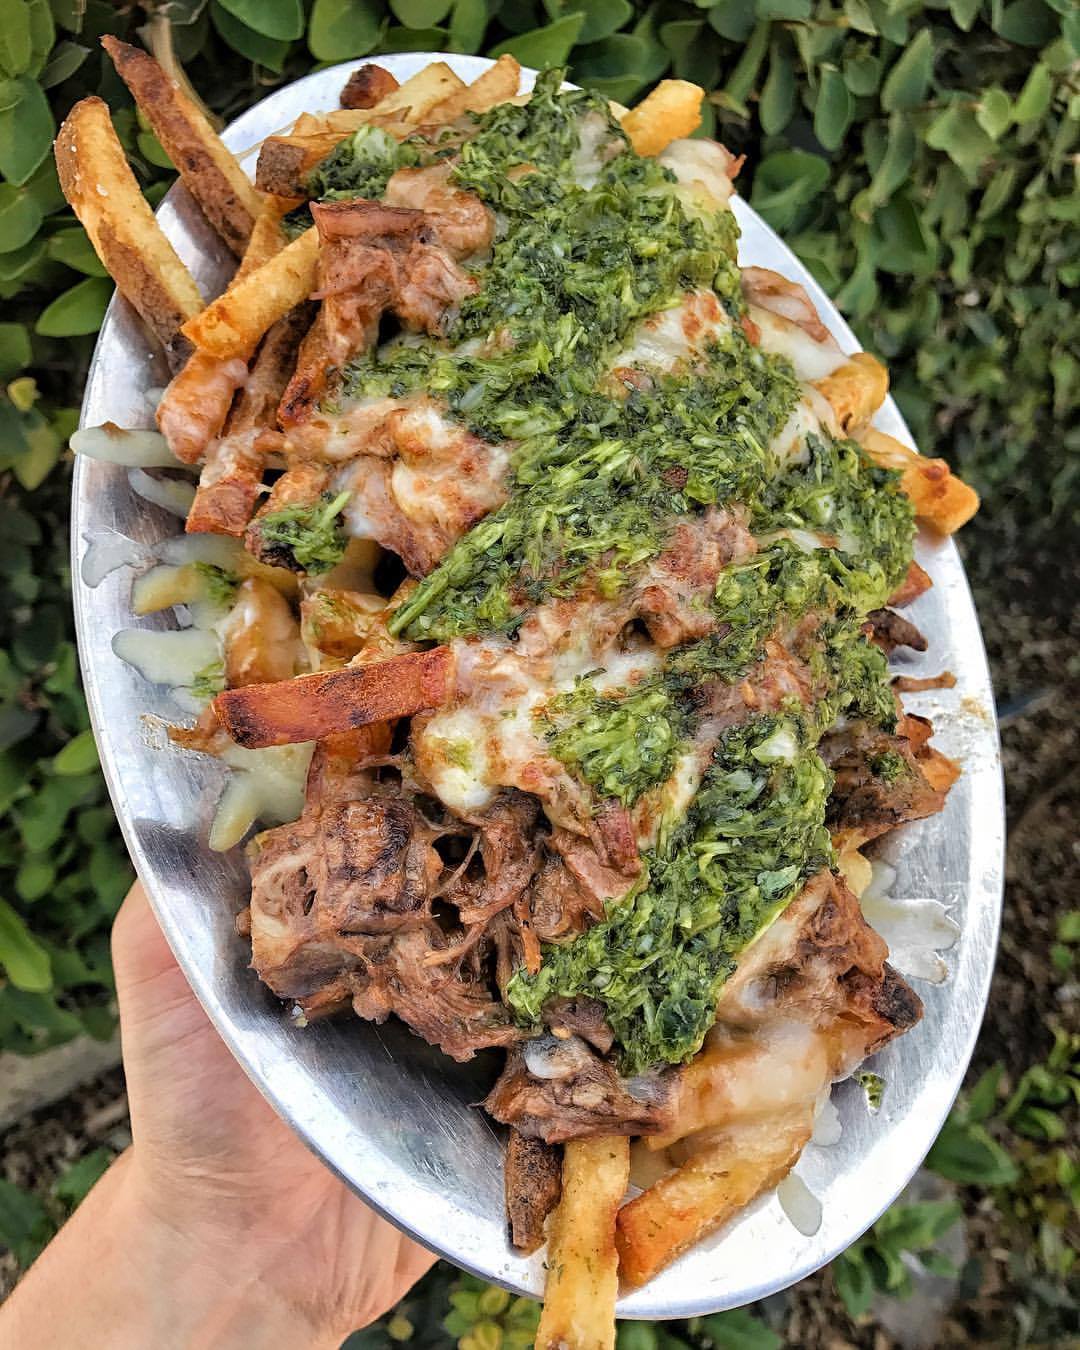 Brisket poutine from The Cut